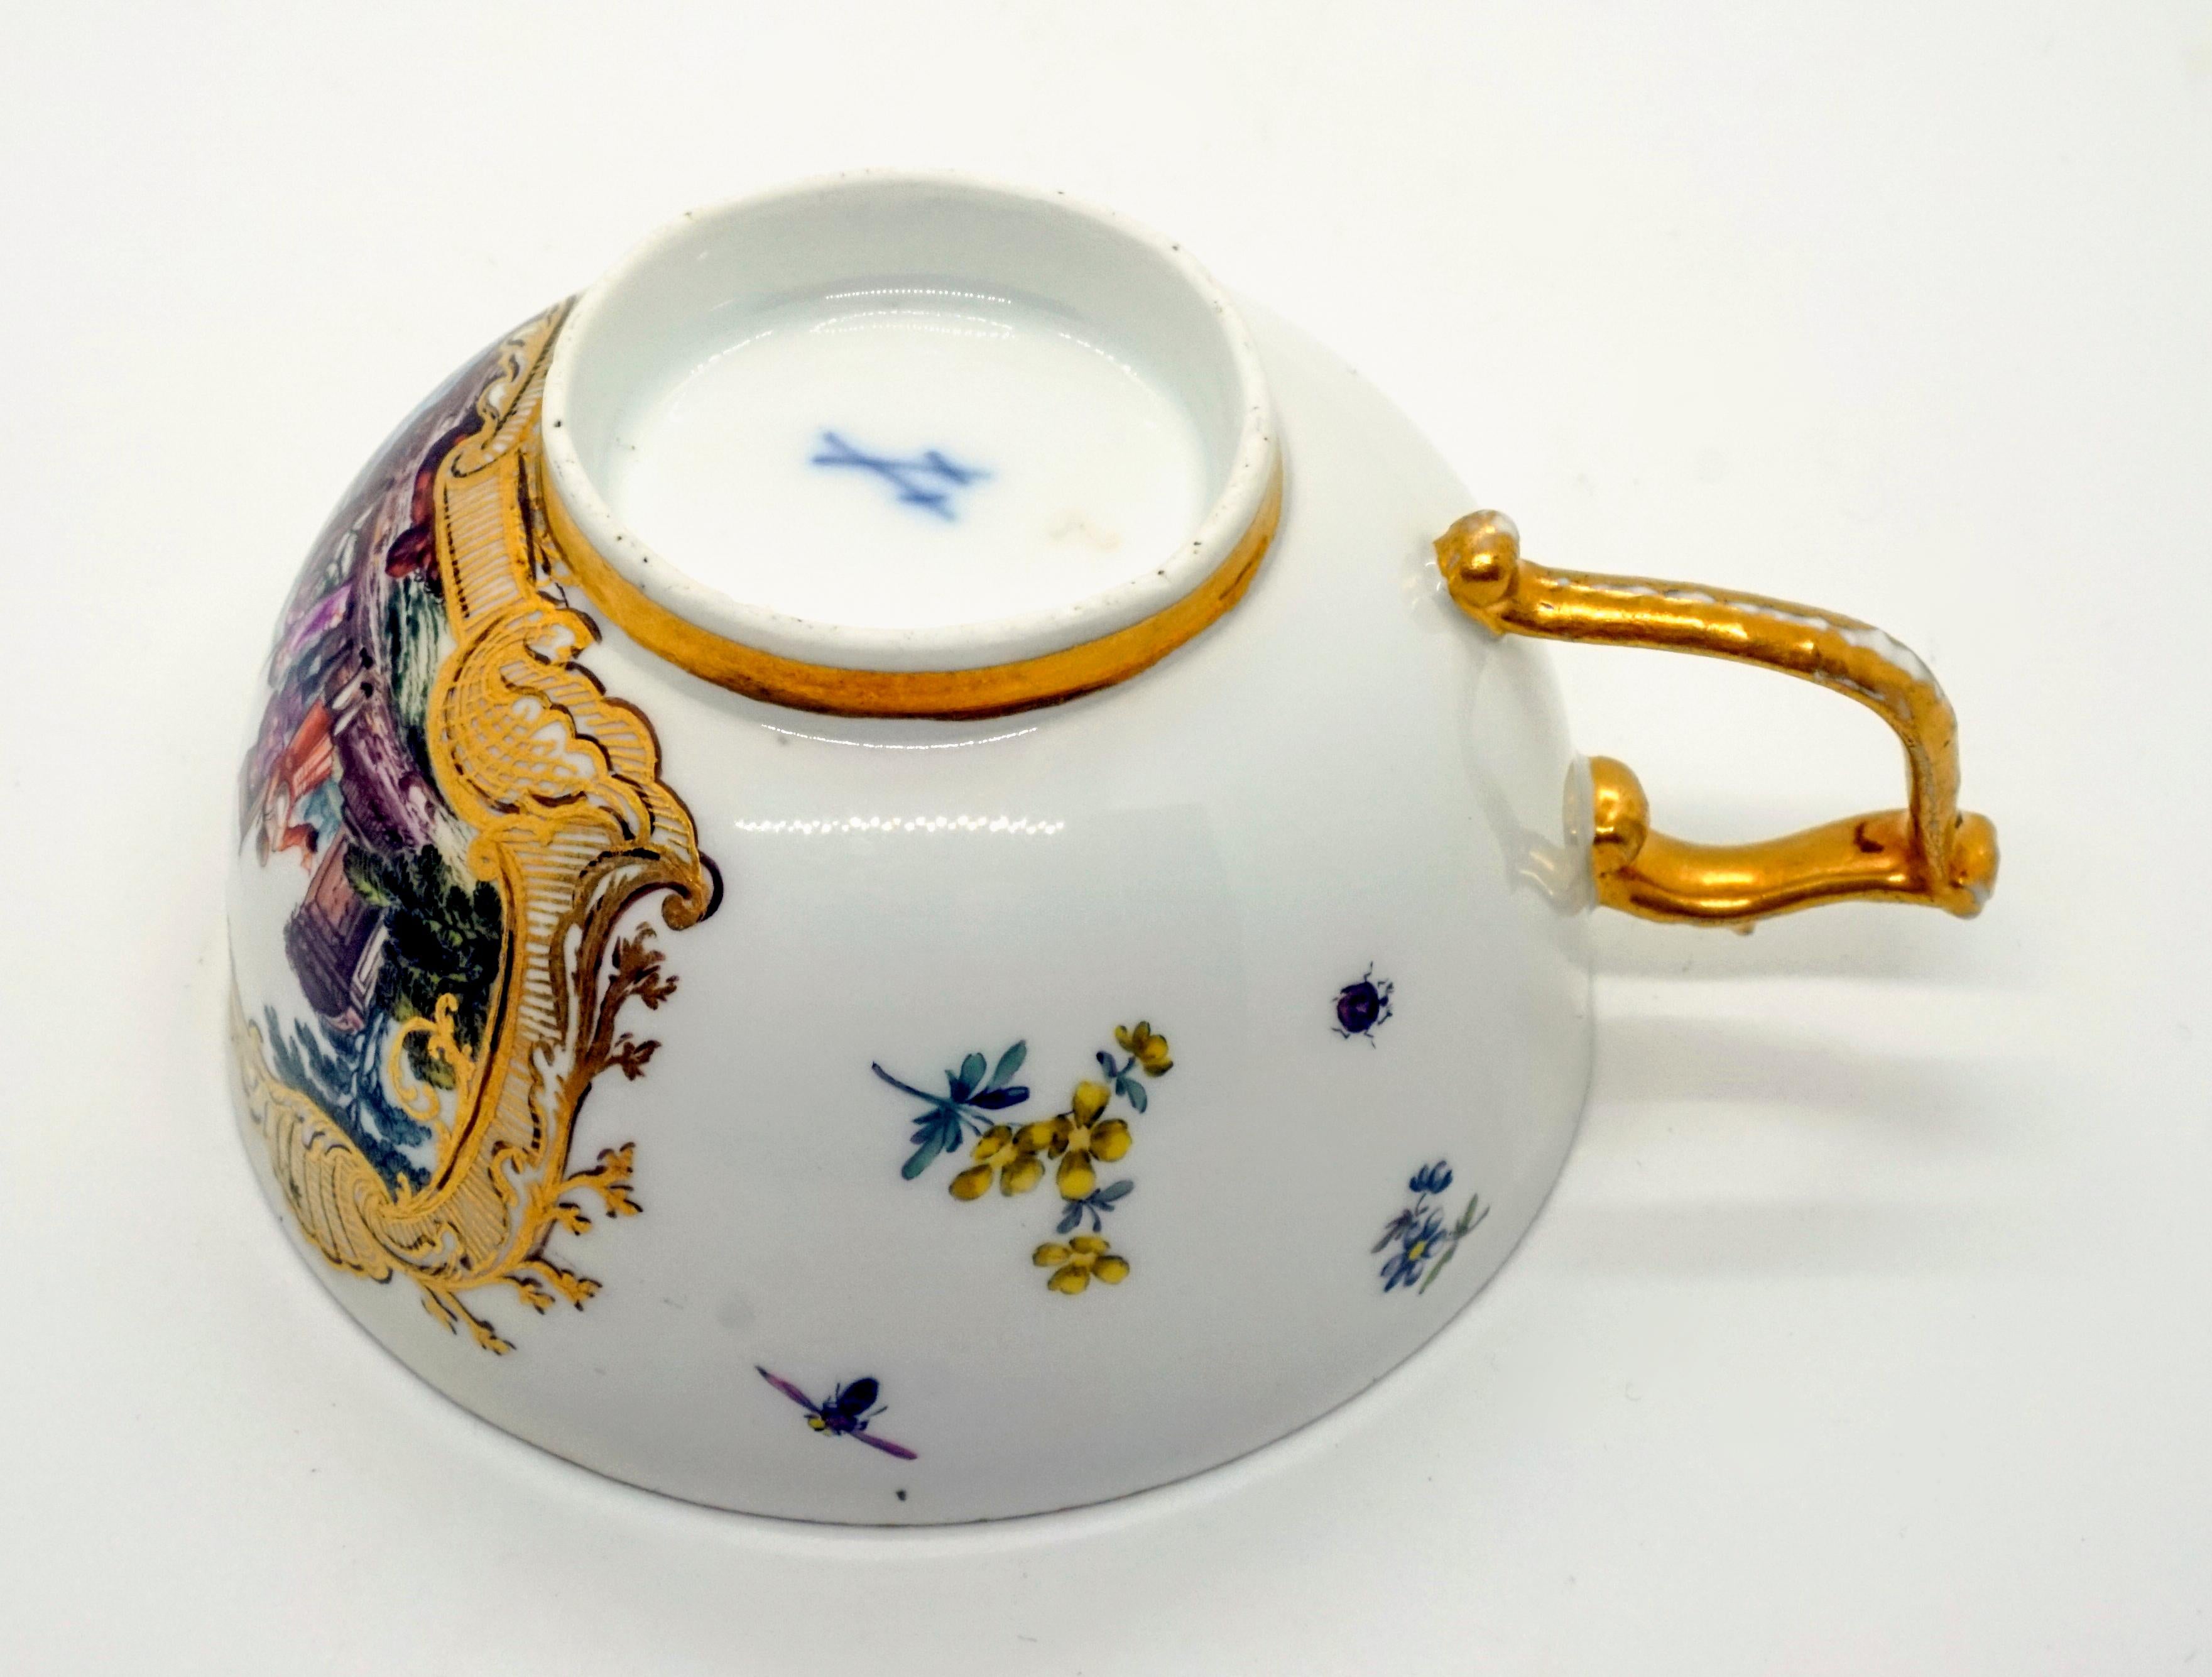 Porcelain Eary 19th Century Meissen Cup and Saucer with Kauffahrtei Scenes and Gold Decor